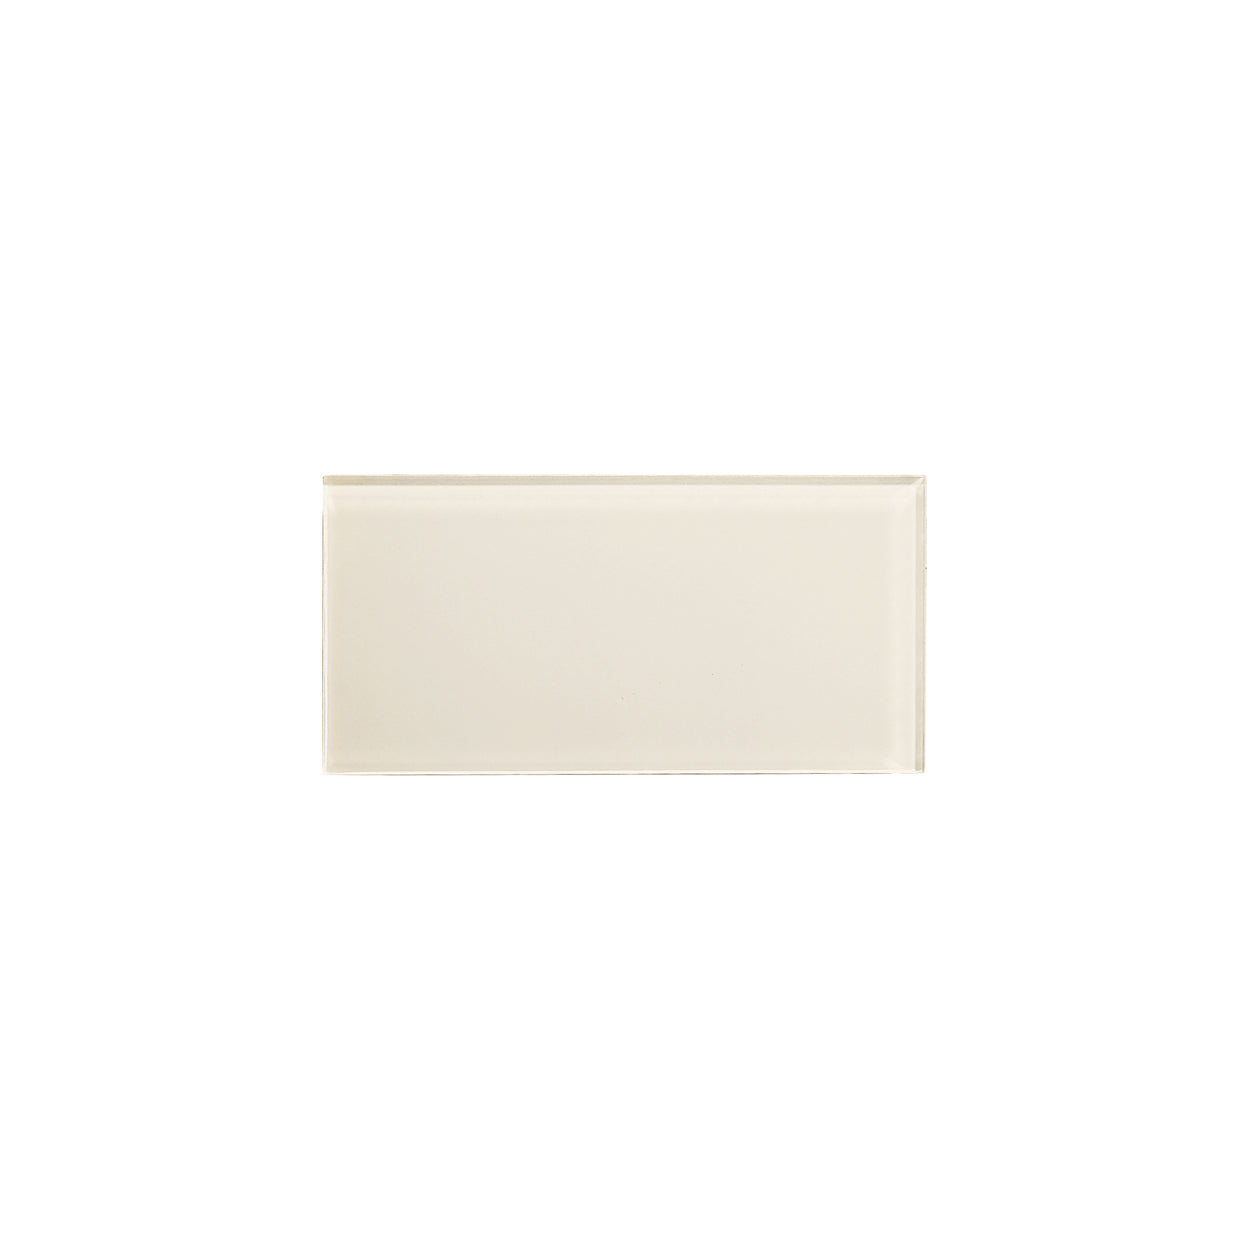 Lungarno - Urban Textures Contempo 3 in. x 6 in. Wall Tile - Ivory